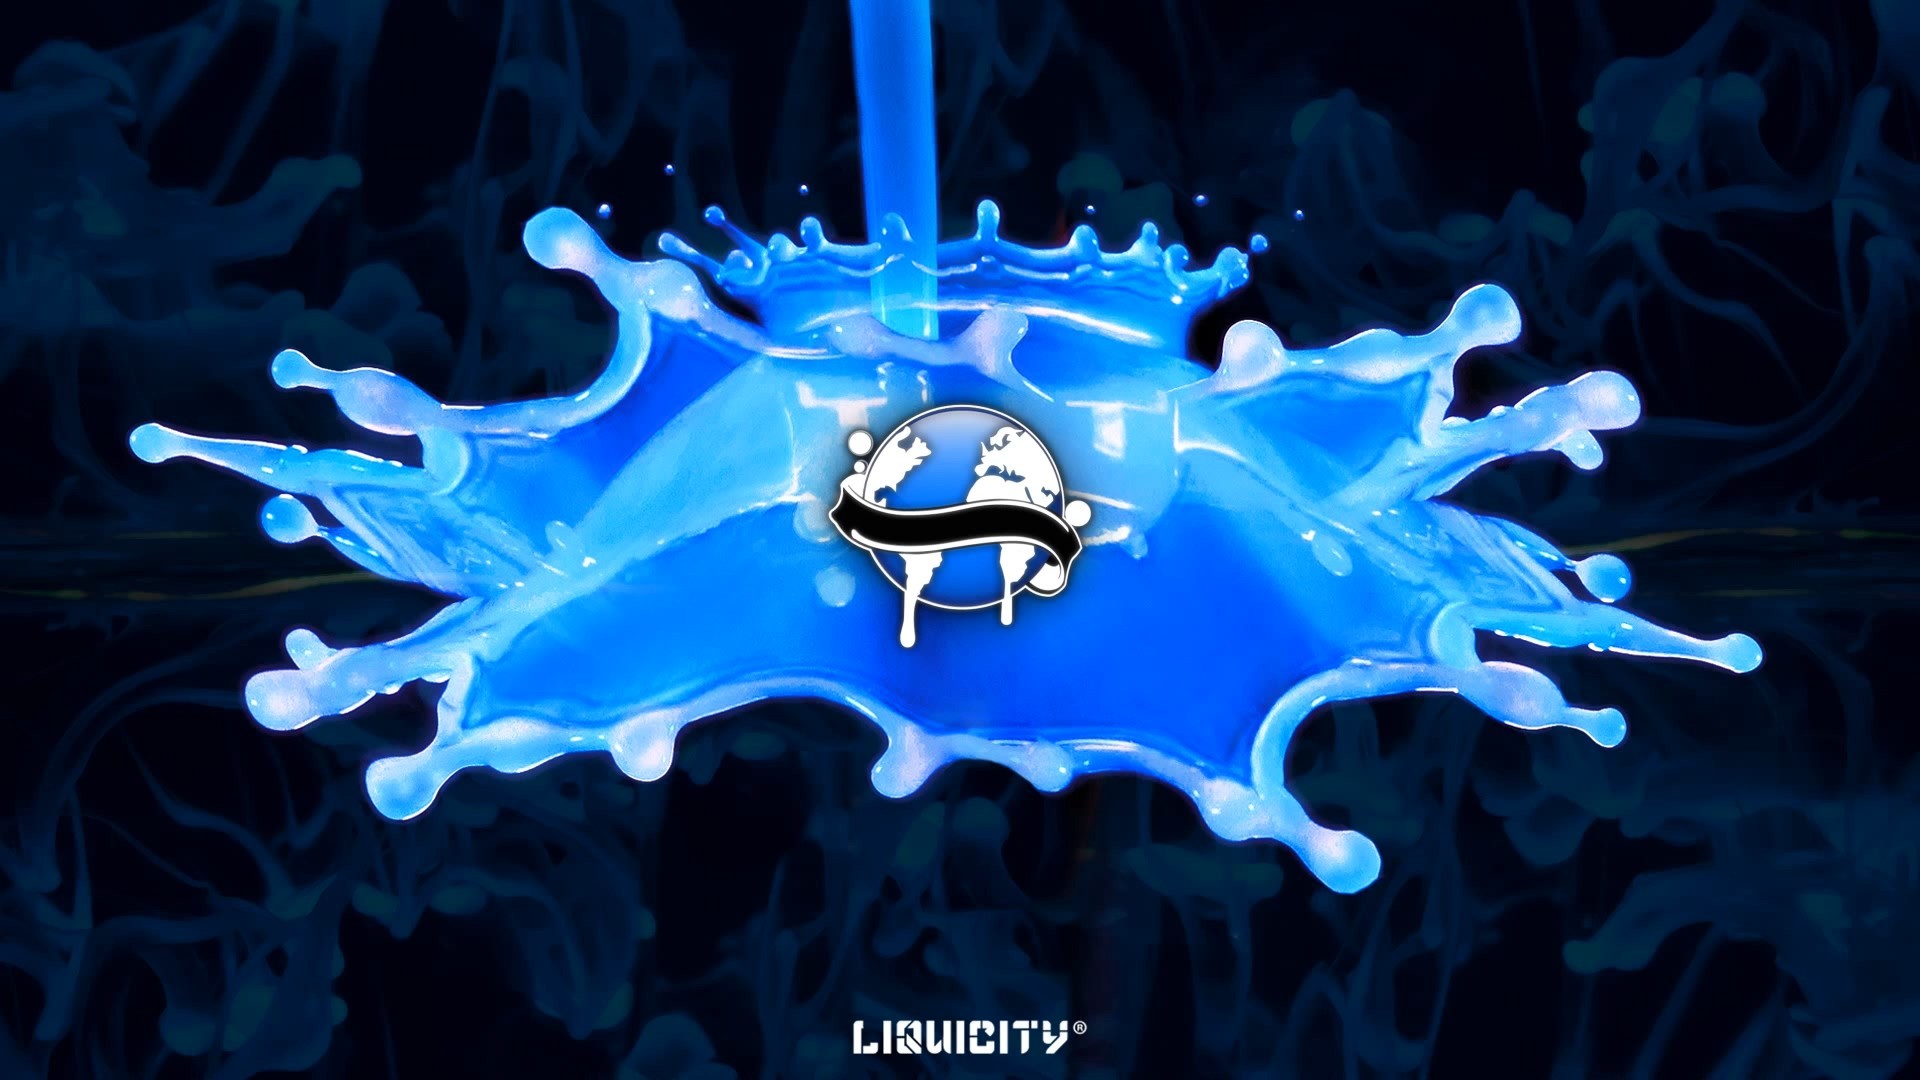 Abstract Drum And Bass Liquicity Wallpaper - Liquicity Iphone , HD Wallpaper & Backgrounds